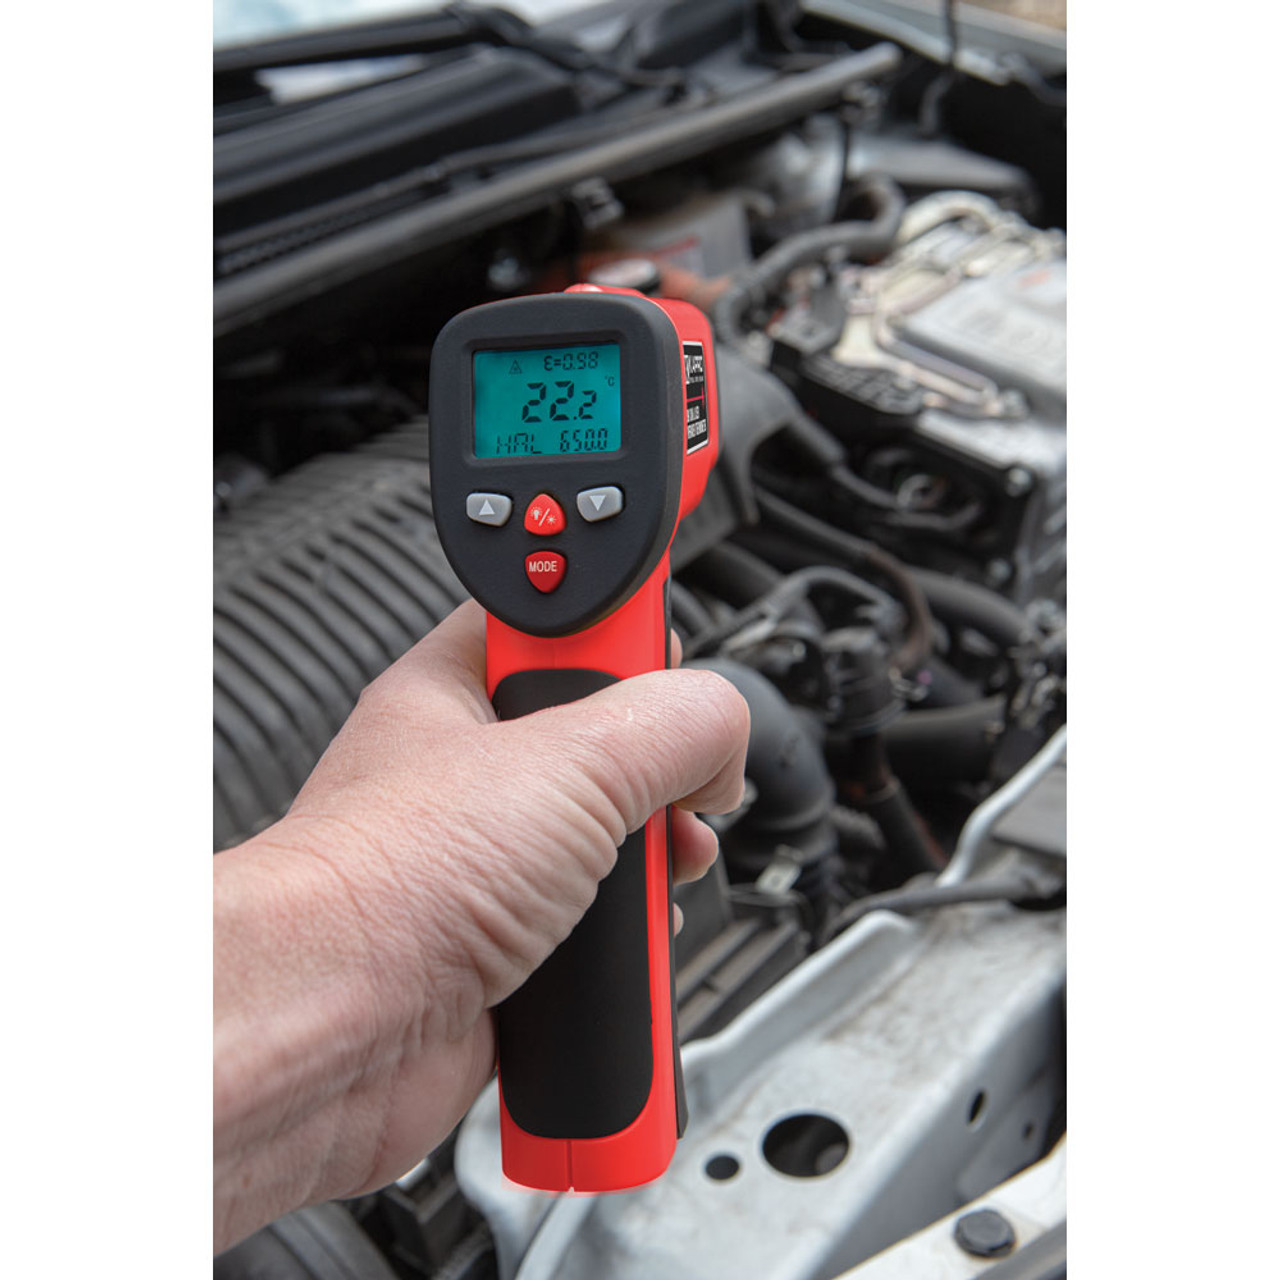 Kapro 398 Dual Laser Infrared Thermometer - Accurate Temperature